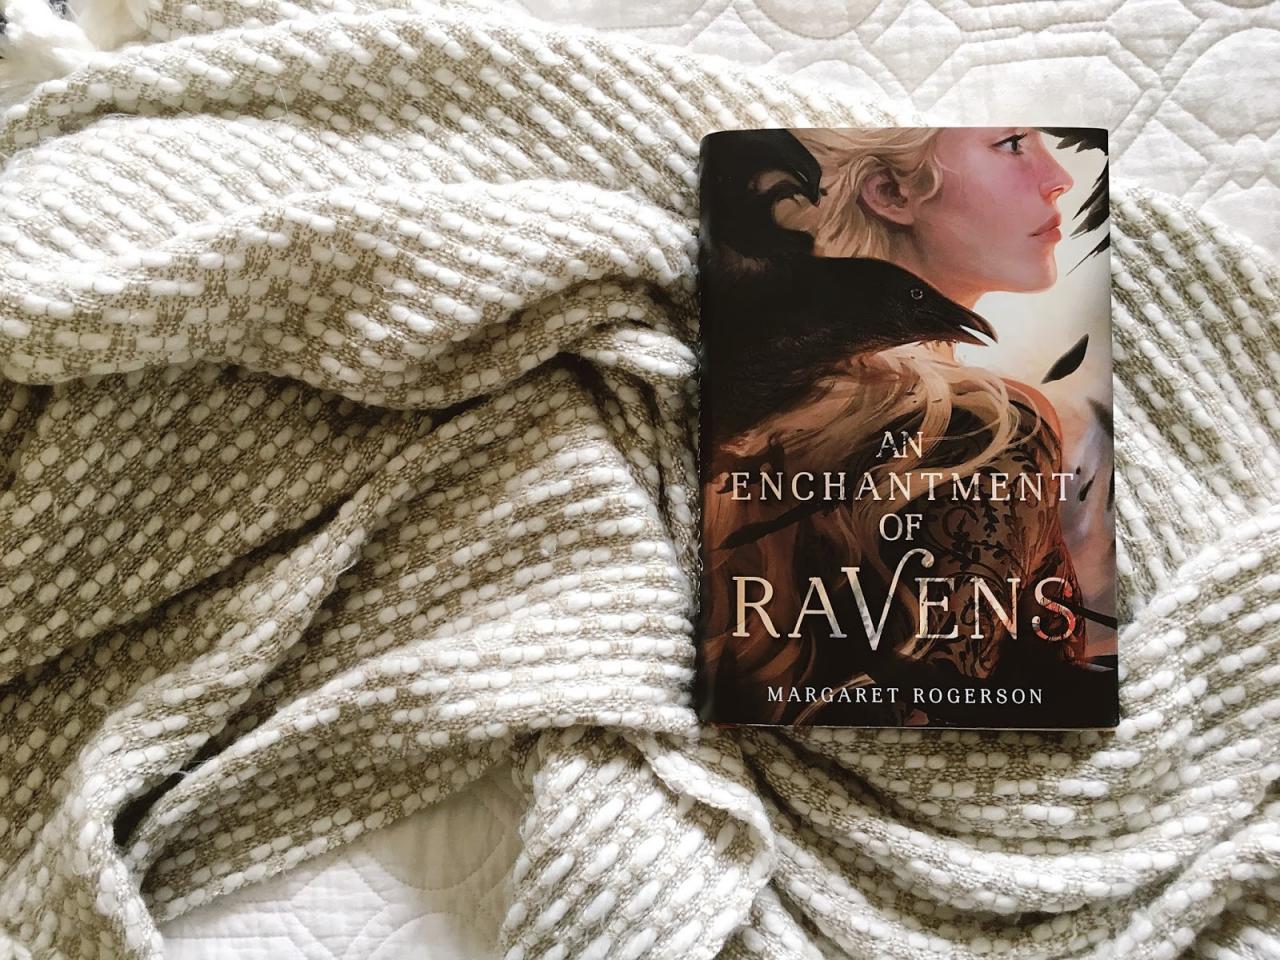 An enchantment of ravens book review